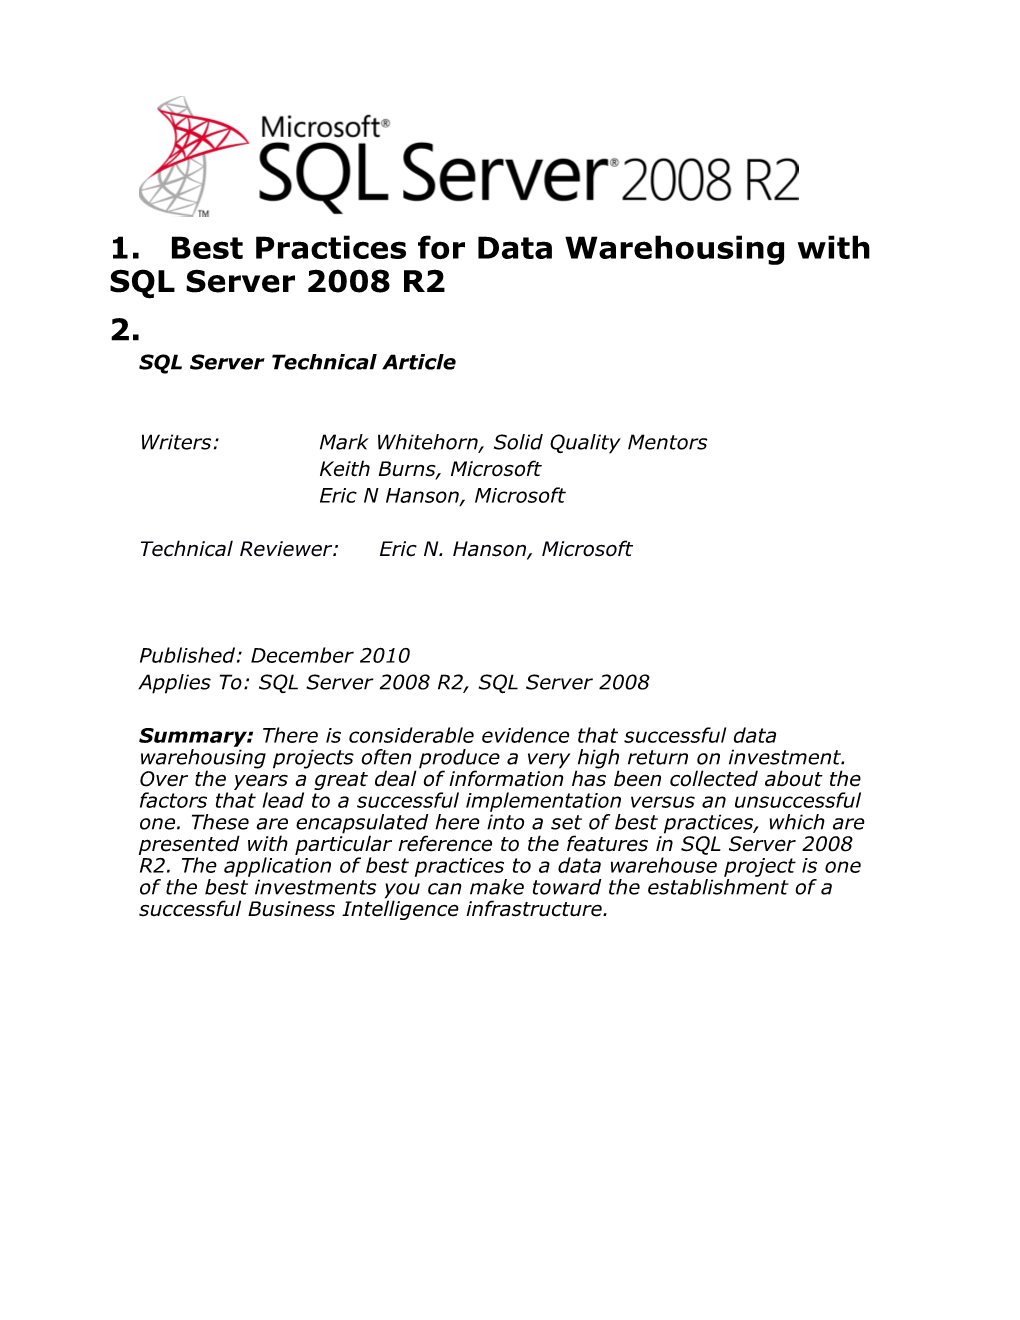 Best Practices for Data Warehousing with SQL Server 2008 R2